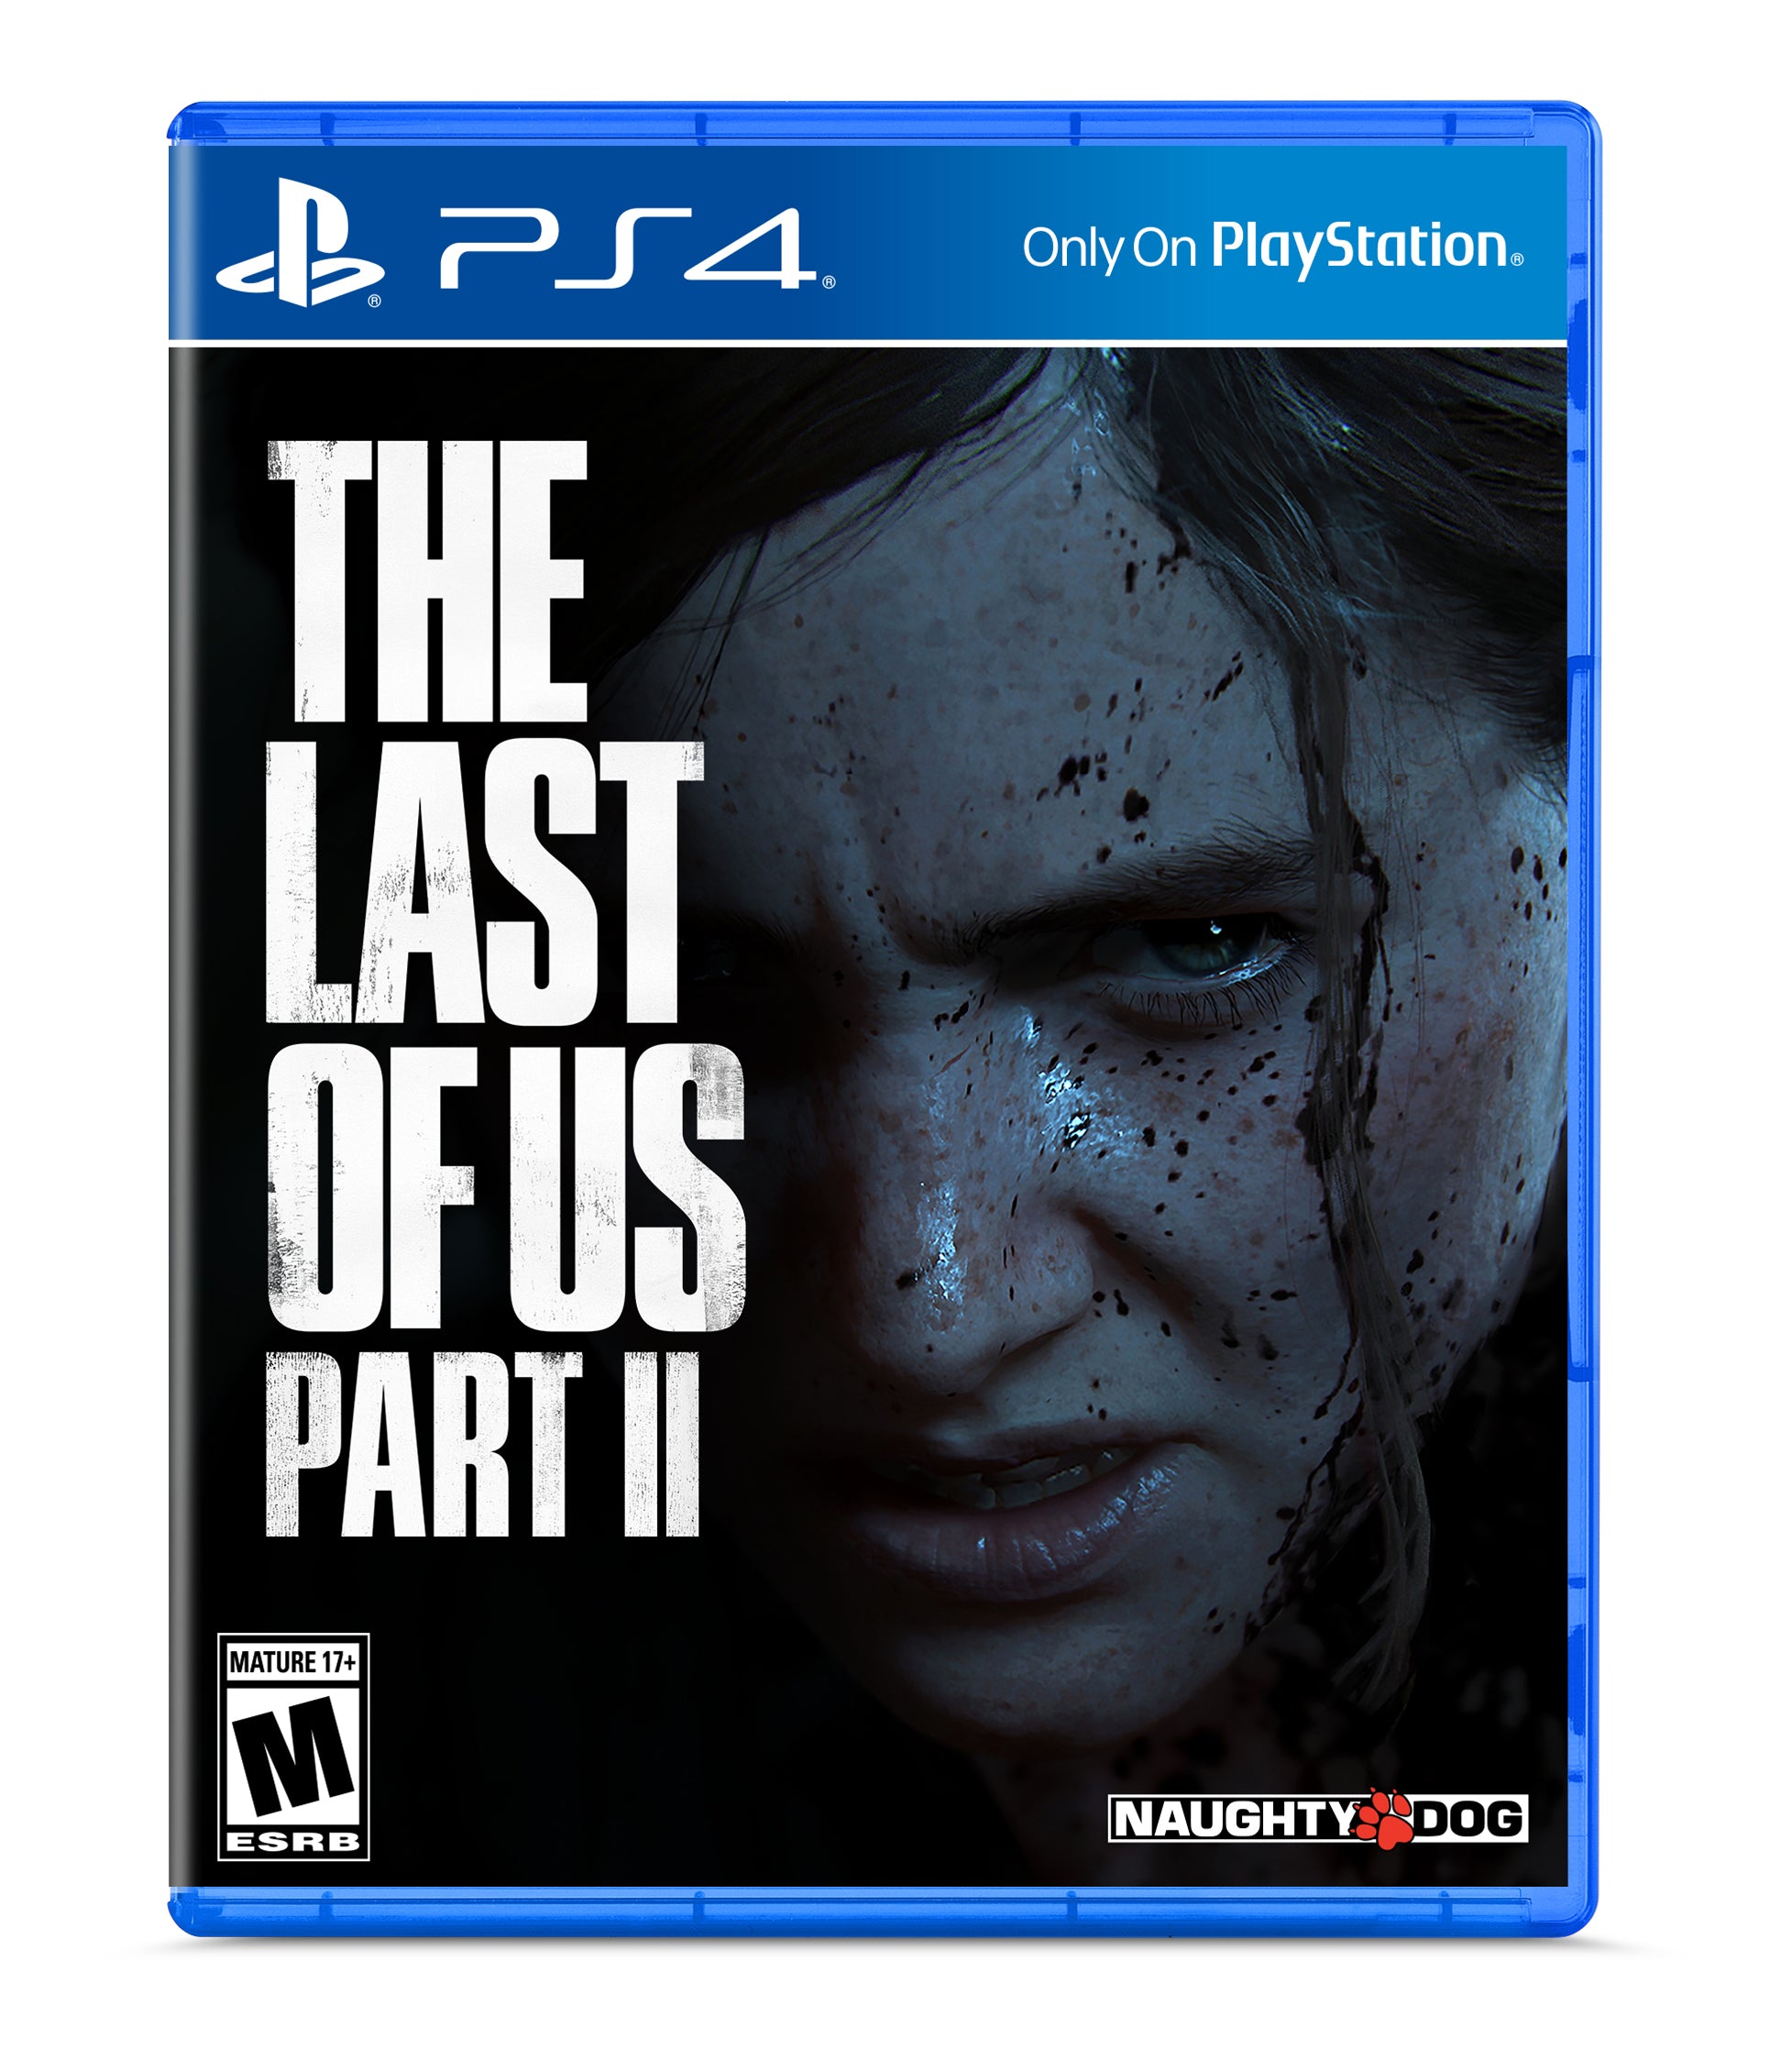 PlayStation 4 The Last of Us Part 2 Bundle - PS4 Slim 1TB Jet Black Gaming Console Bundle With The Last of Us Part II - New Game!